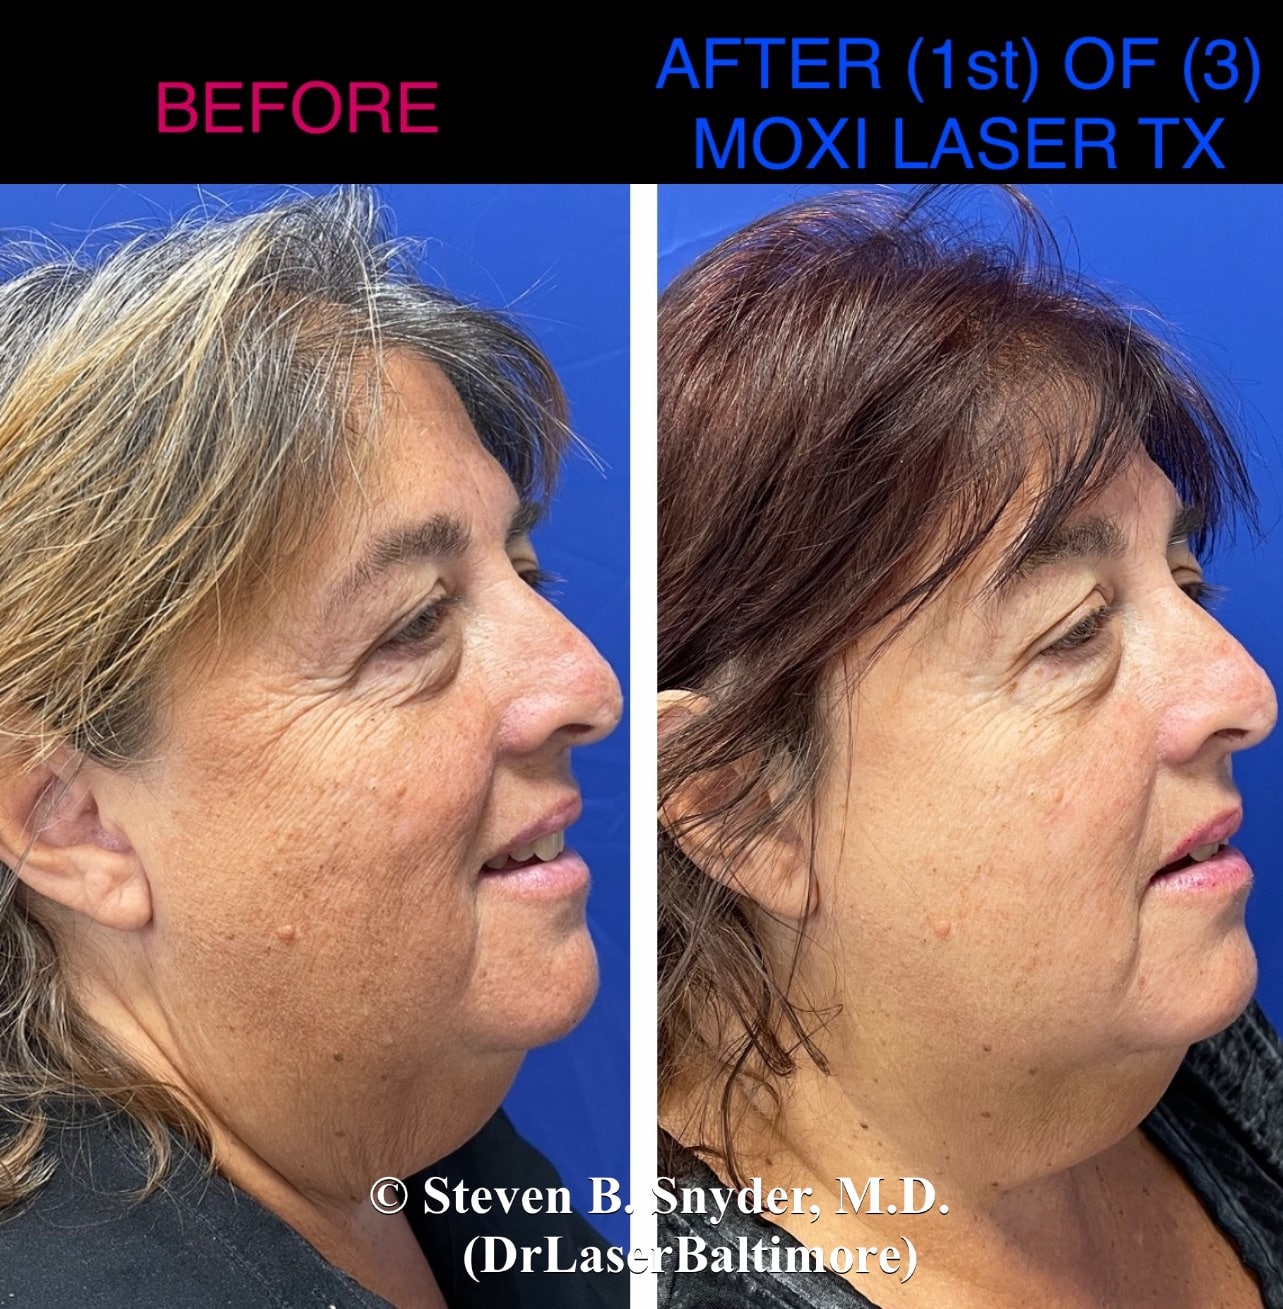 Before and after images showing a woman's face with uneven skin tone and texture before and smoother, brighter skin after Moxi Laser treatment in Baltimore.